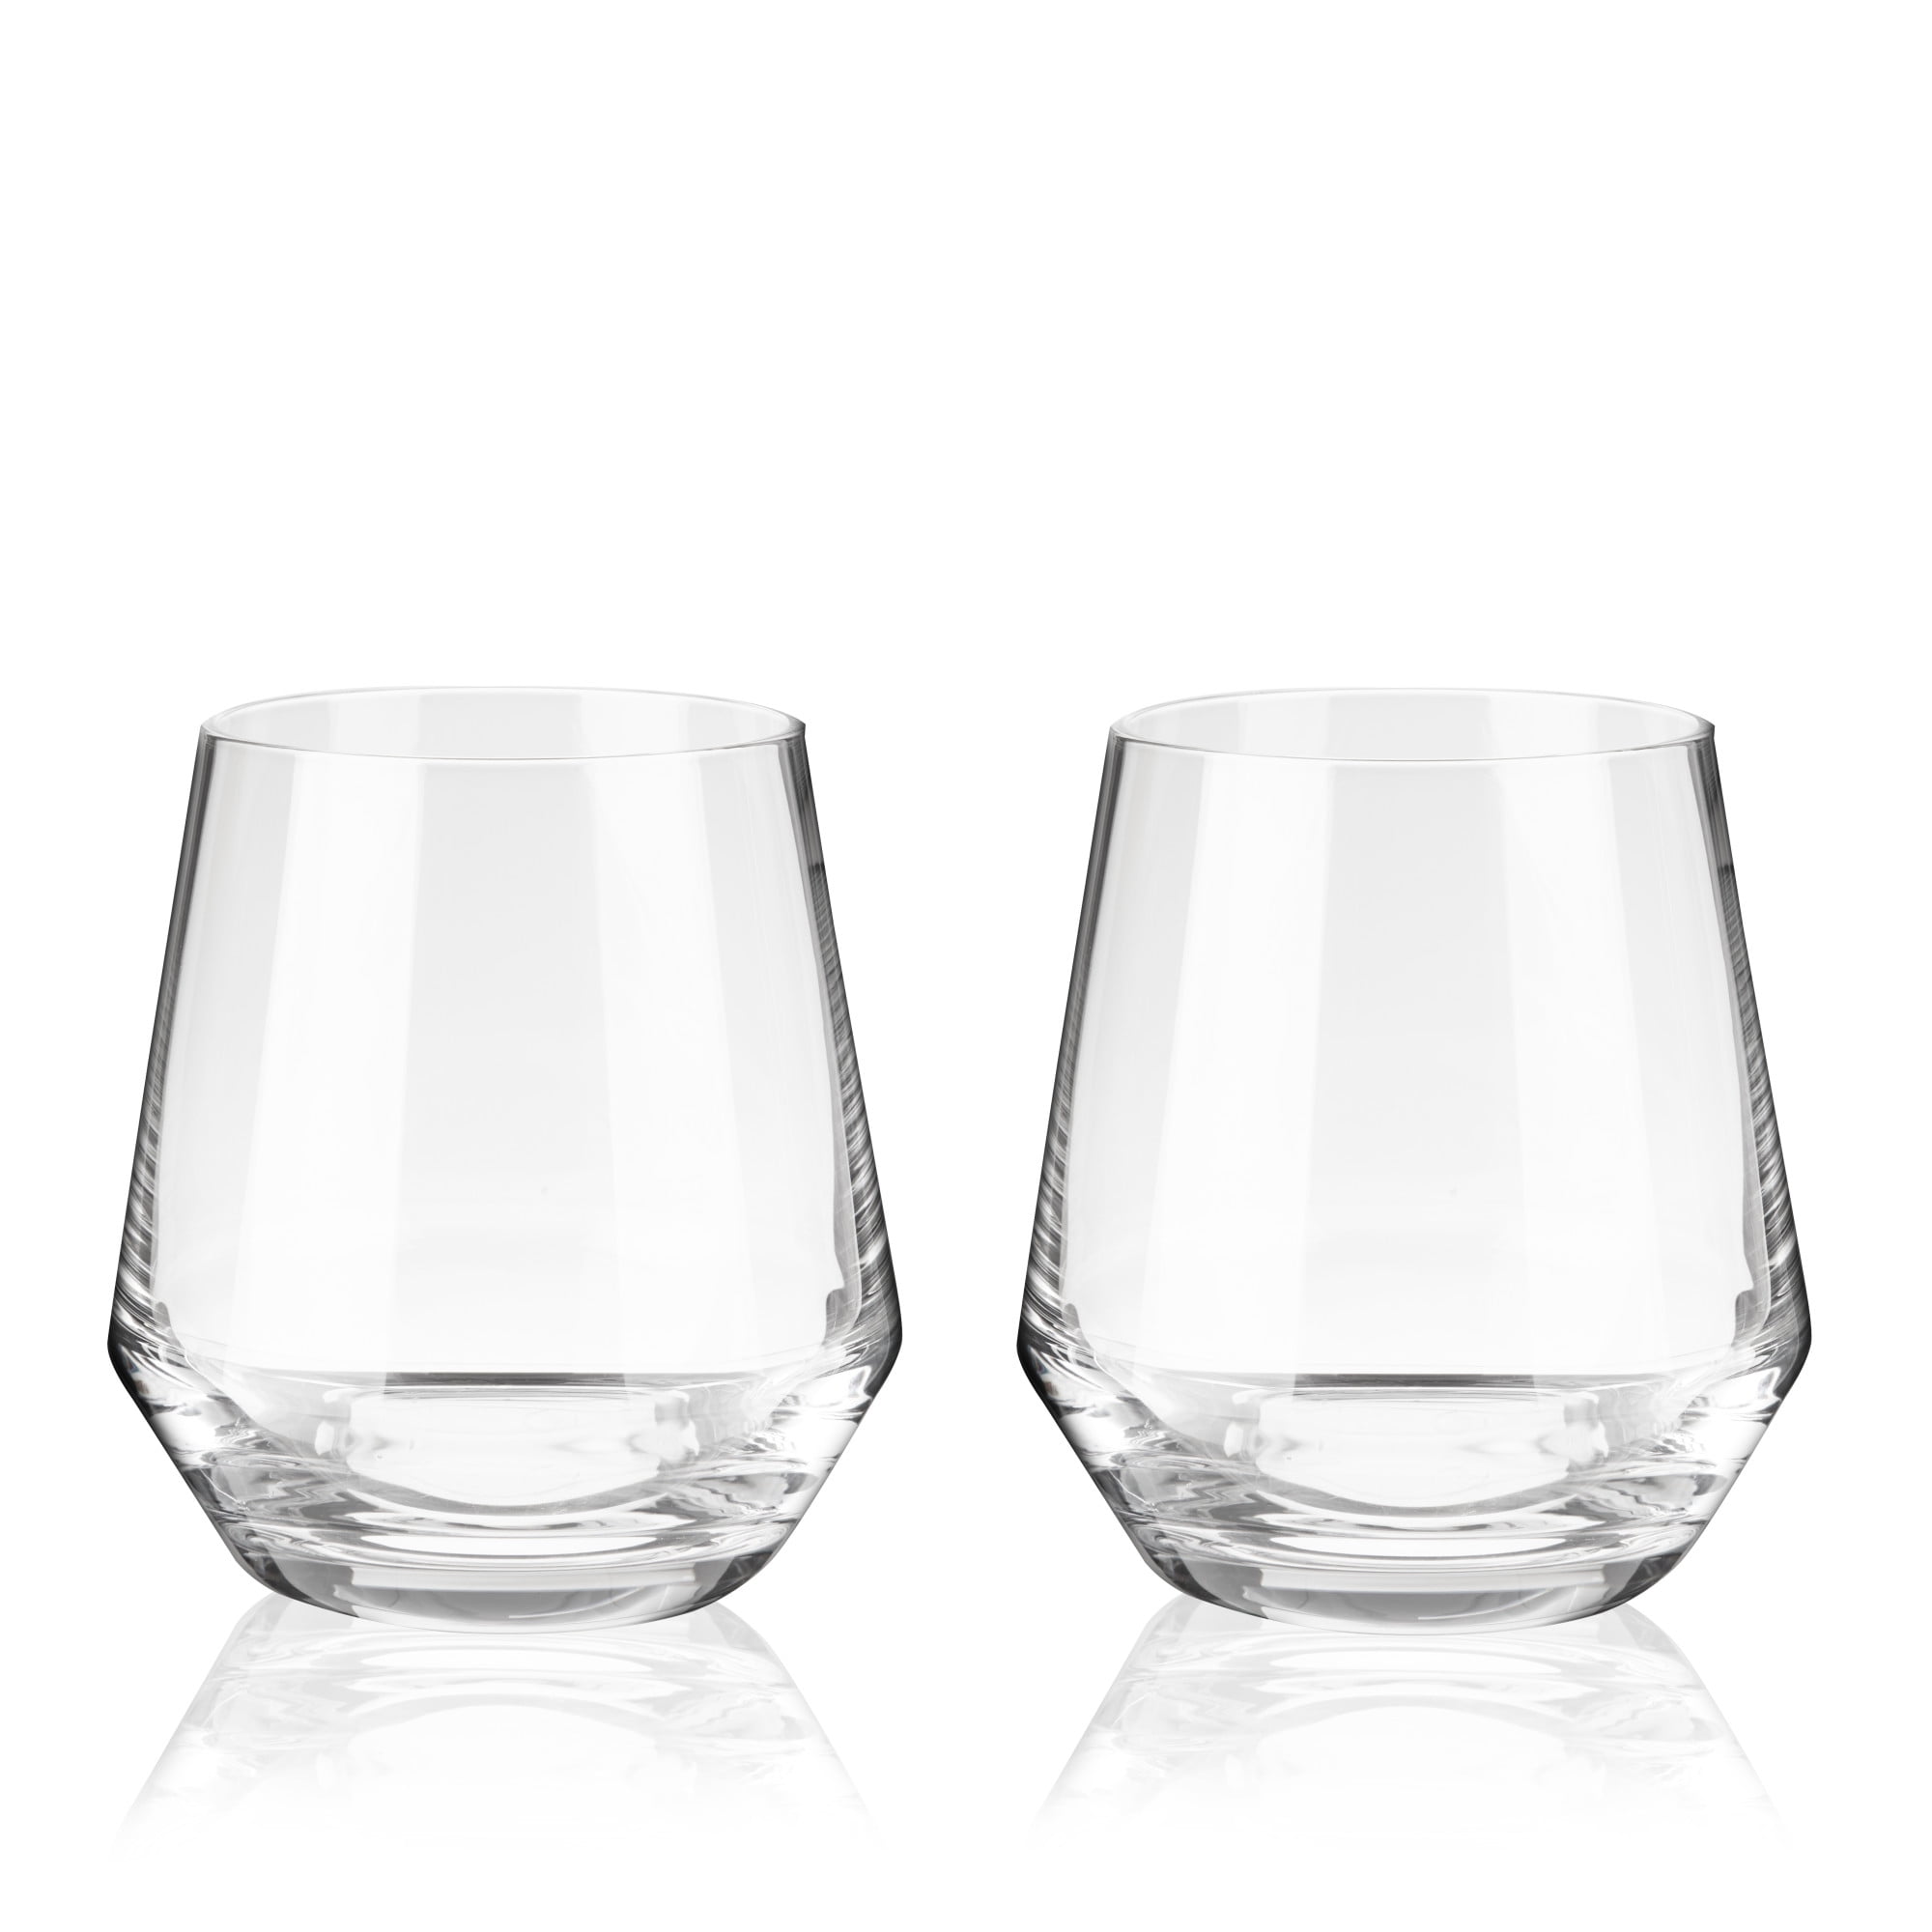 These Whiskey Glasses Are Hand-Blown and Come With Ice Ball Molds